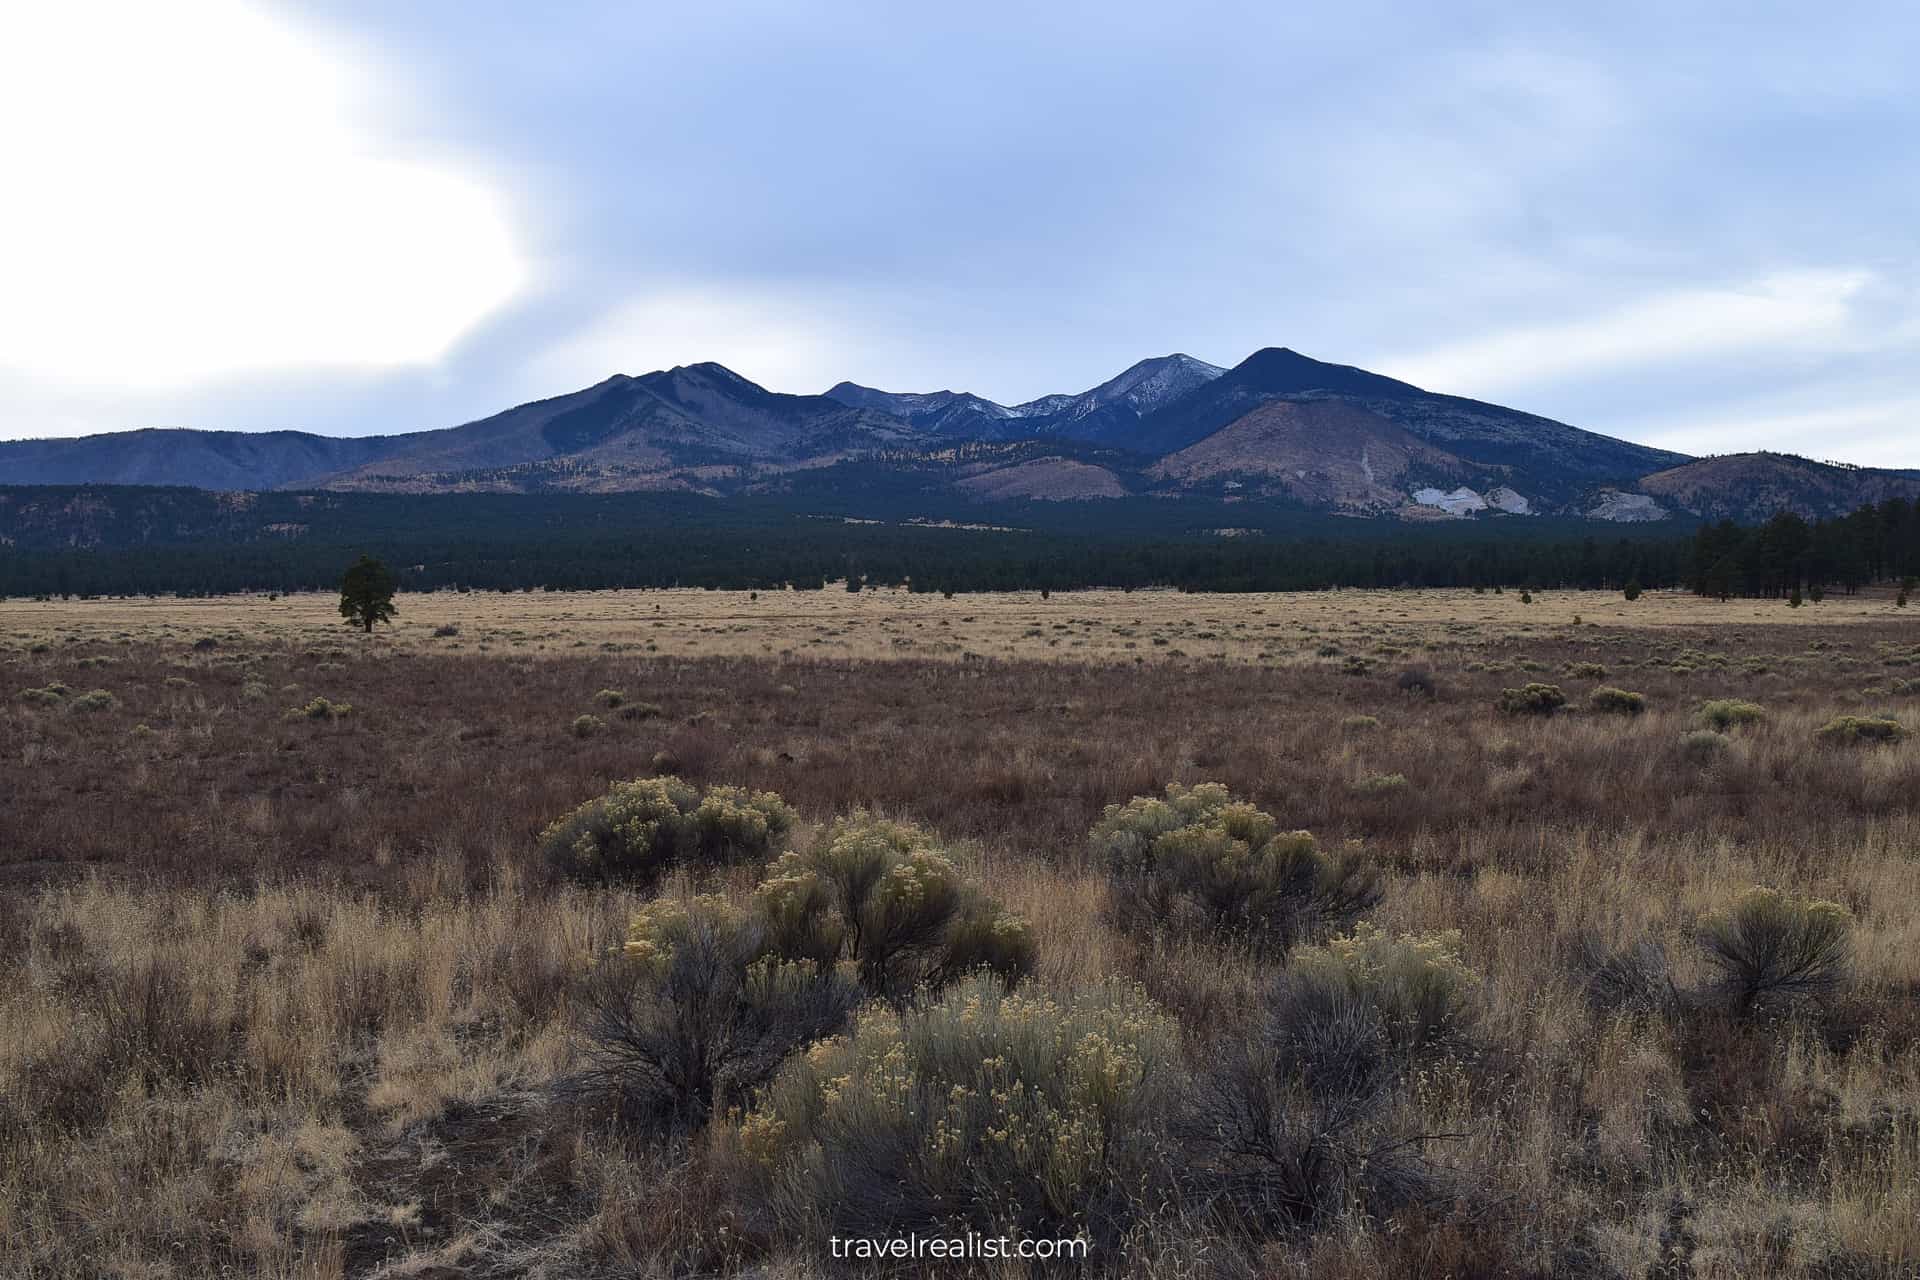 Humphreys Peak as viewed from Sunset Crater Volcano National Monument in Arizona, US